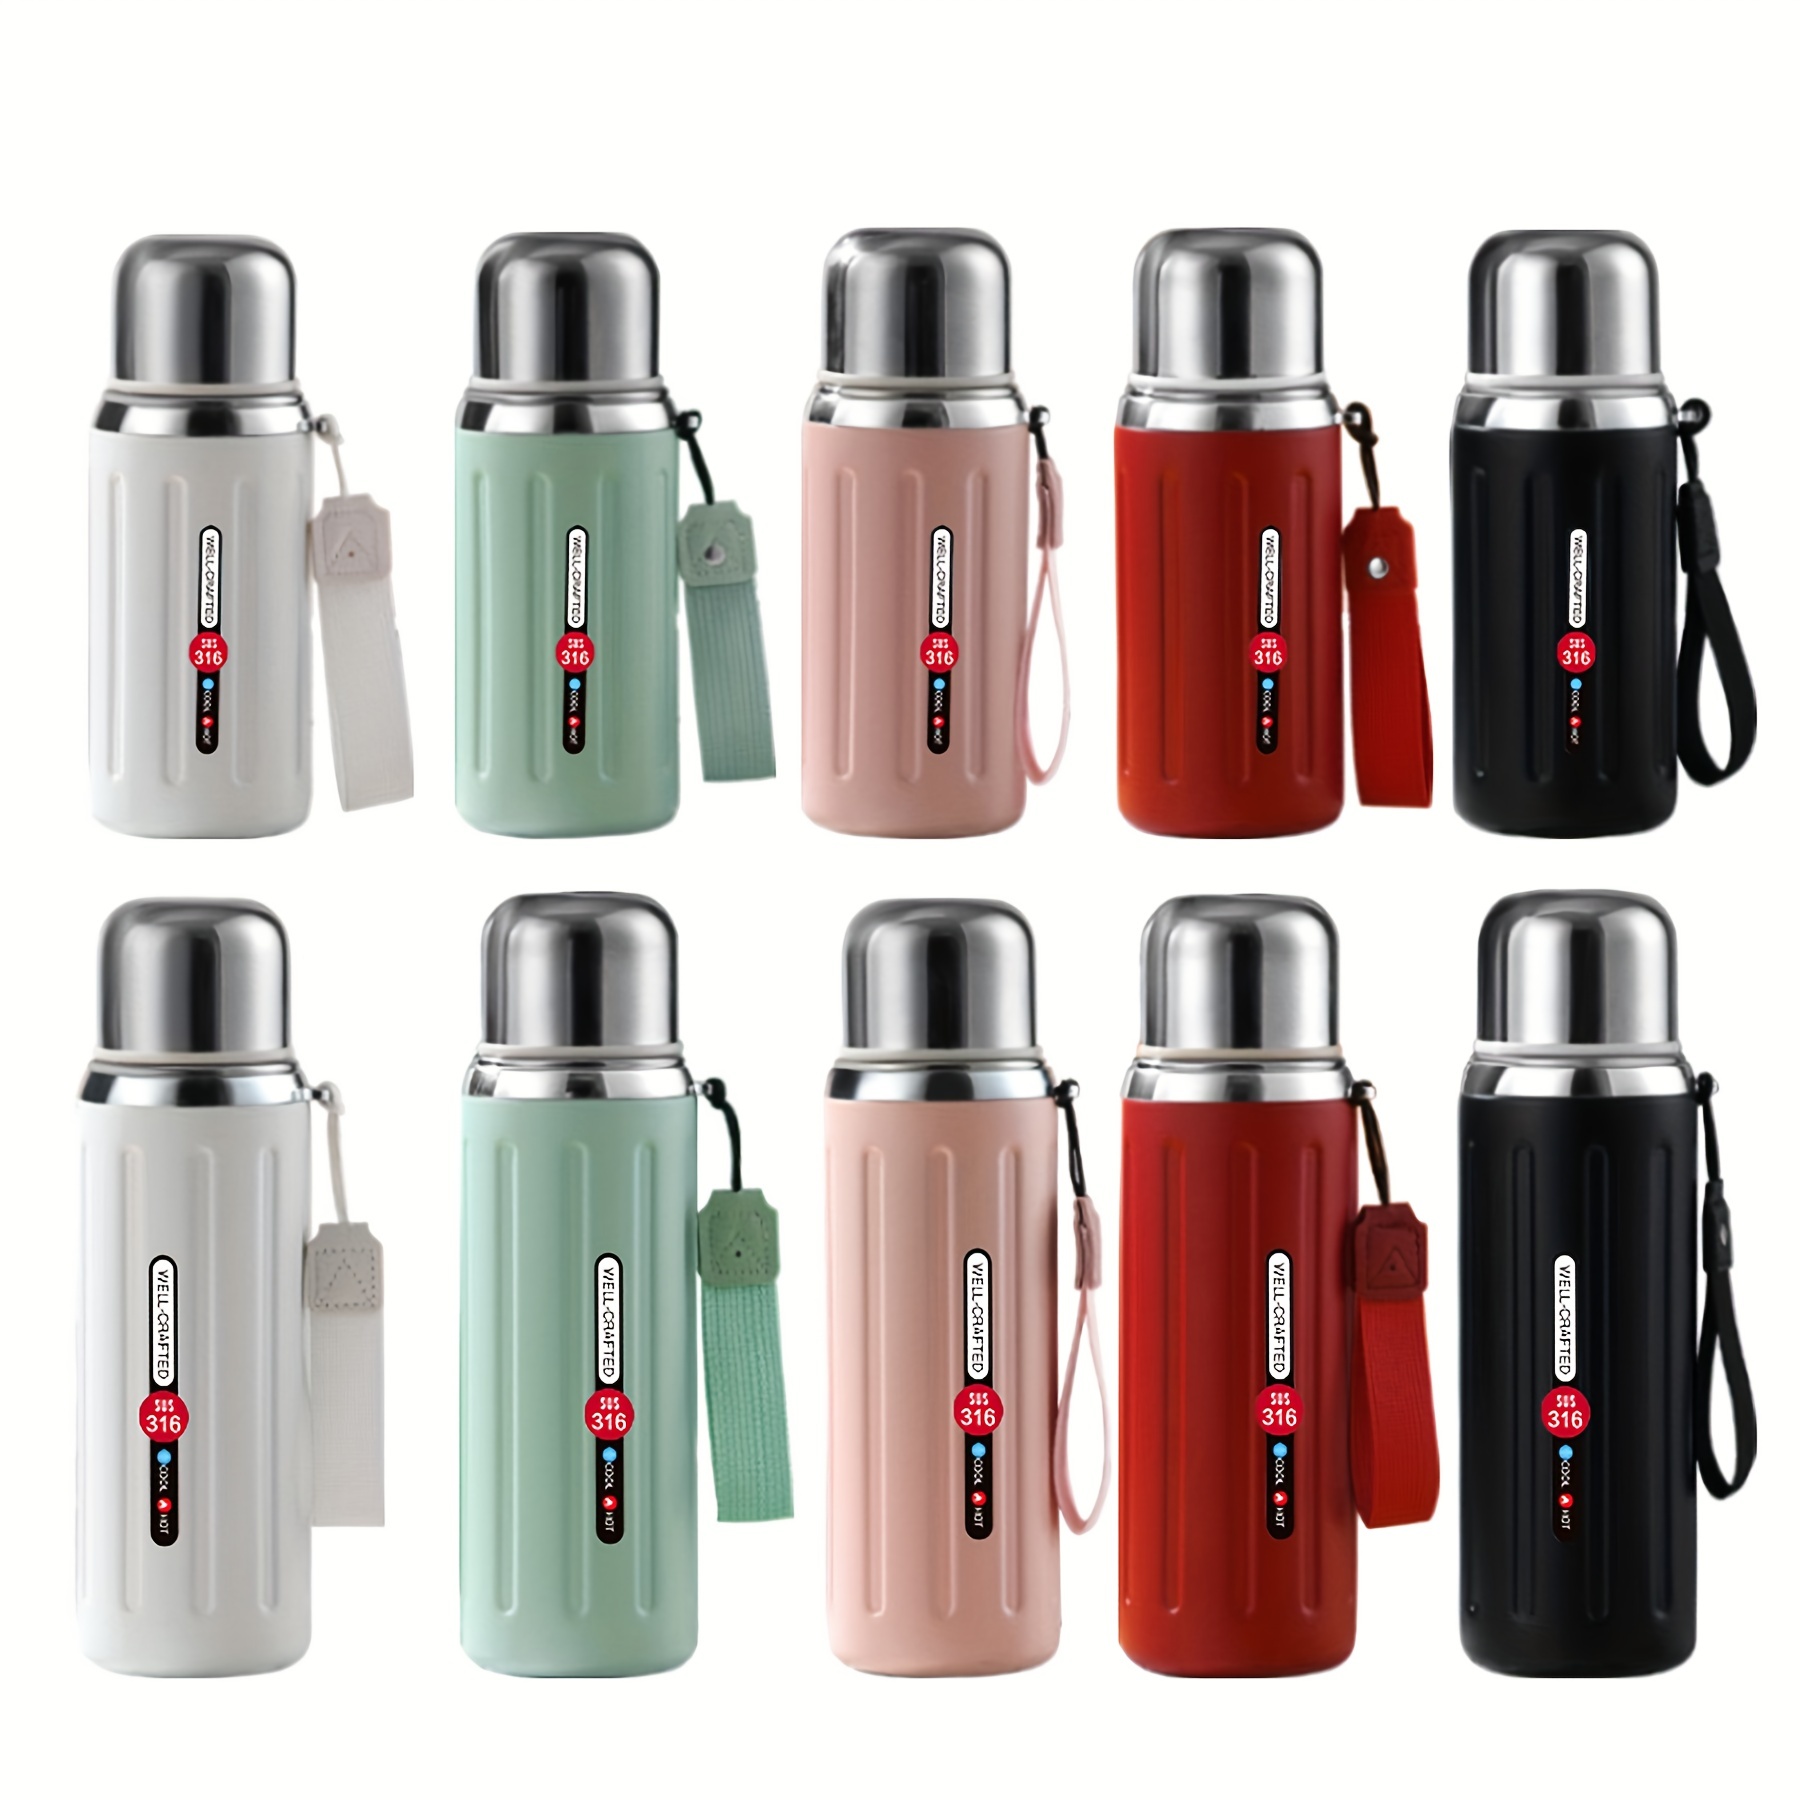 316 Stainless Steel Big Capacity Thermos Bottle 1L/2L /3L/ Outdoor Travel  Coffee Mugs Thermal Vaccum Water Bottle Thermal Mug